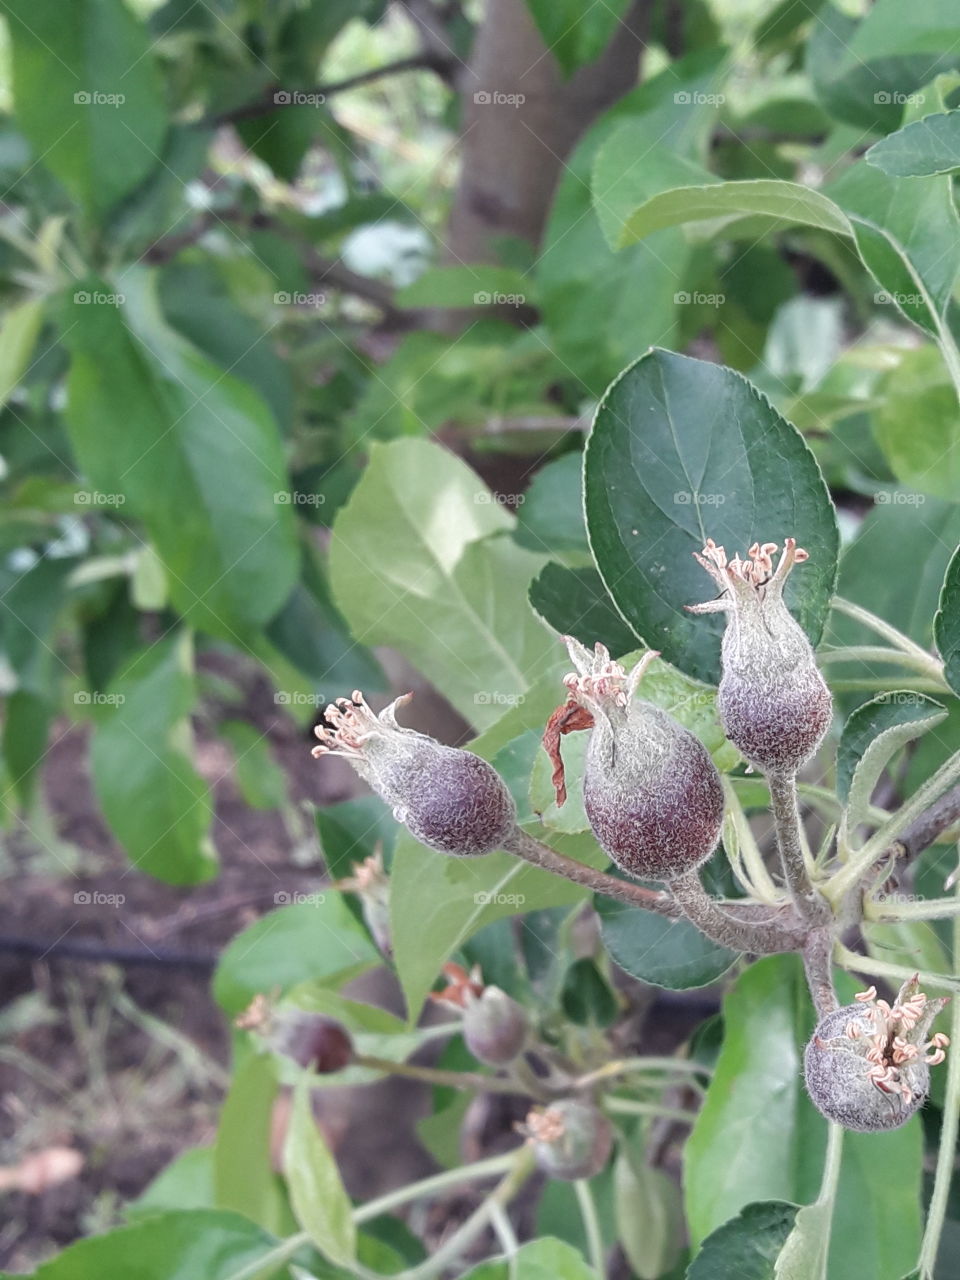 Small apples on an apple tree.